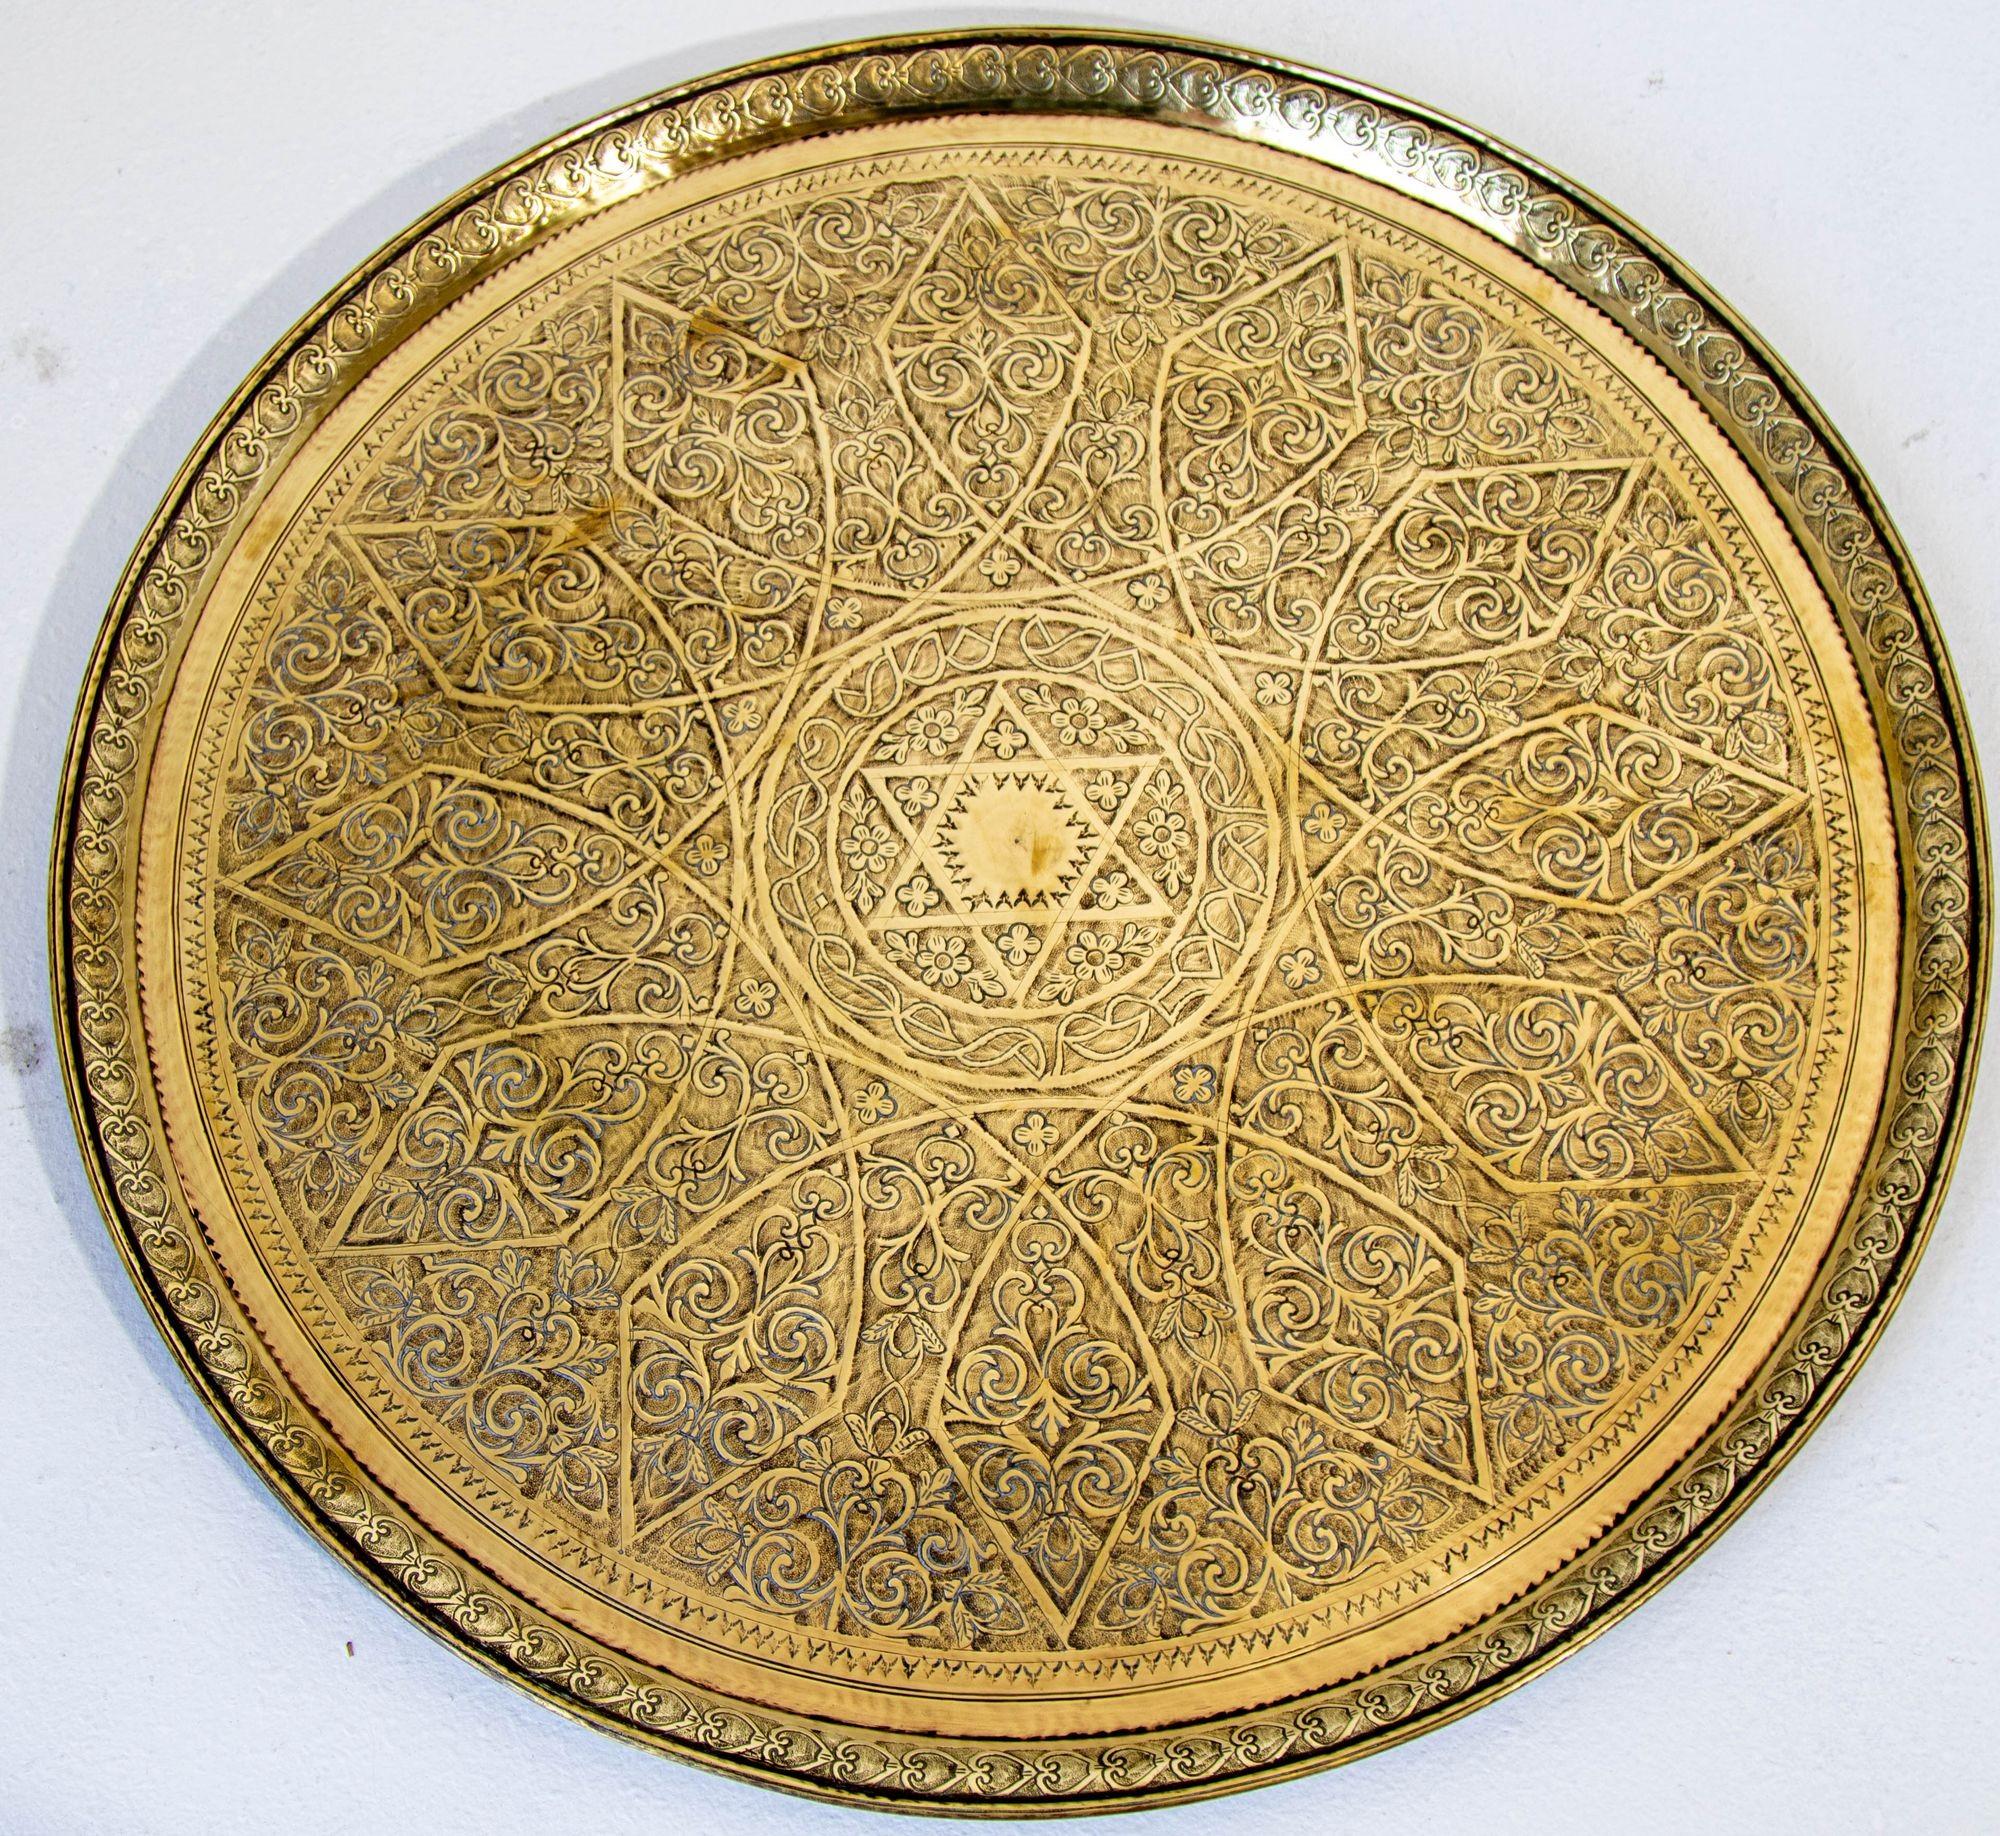 A pished Moroccan brass tray is a stunning piece of traditional craftsmanship that showcases the rich artistic heritage of Morocco. It is meticously handcrafted by skilled artisans who specialize in metalwork and imbue each tray with intricate